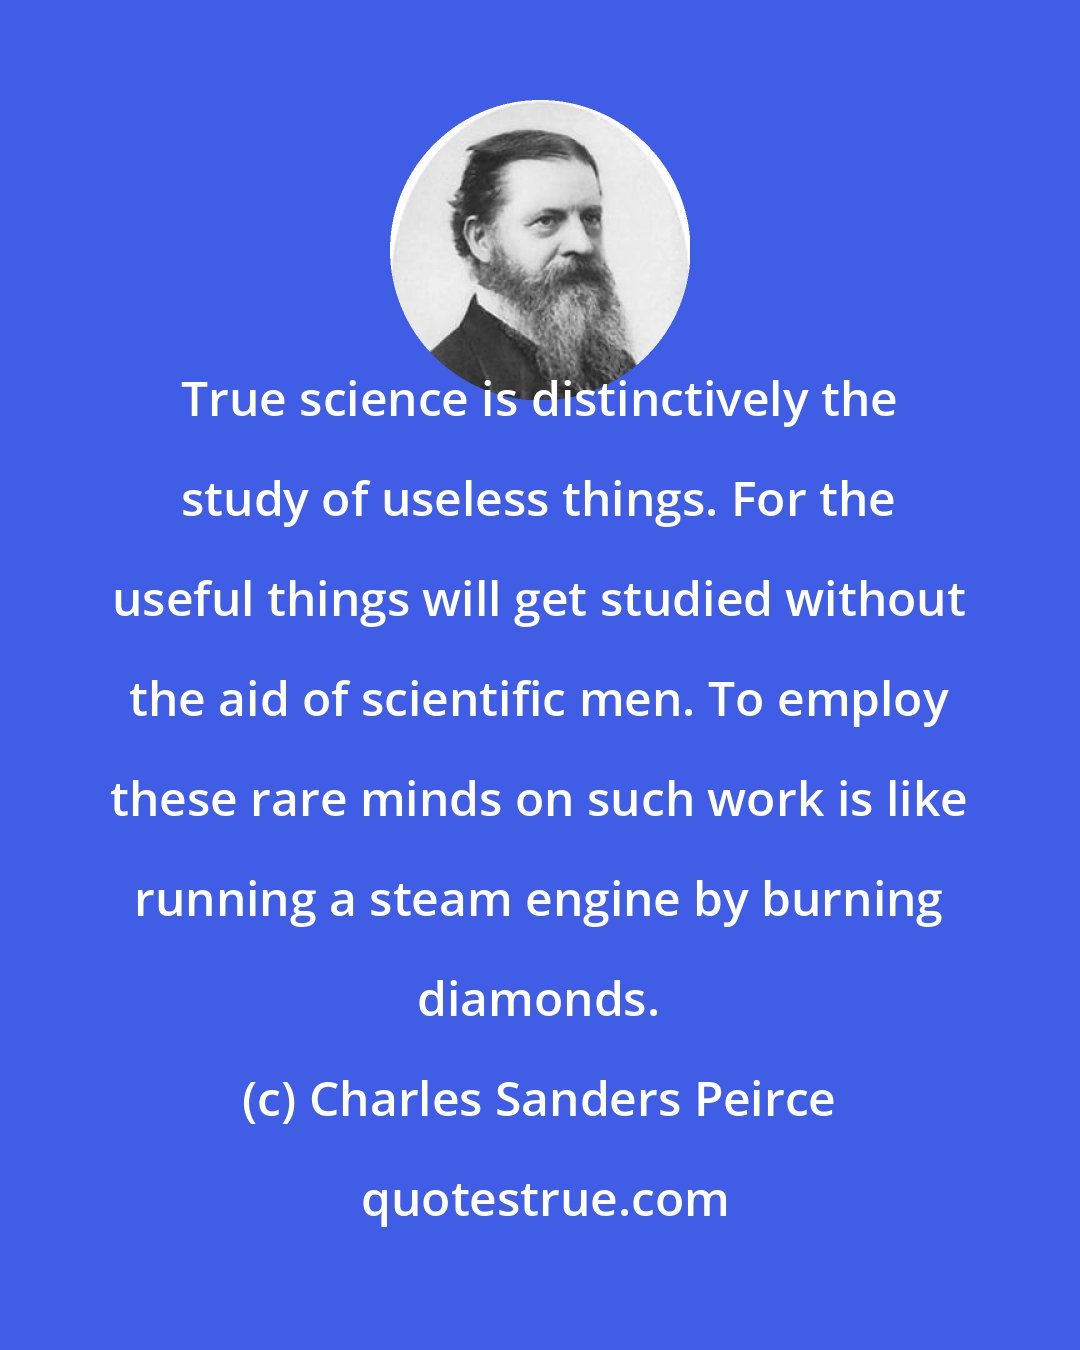 Charles Sanders Peirce: True science is distinctively the study of useless things. For the useful things will get studied without the aid of scientific men. To employ these rare minds on such work is like running a steam engine by burning diamonds.